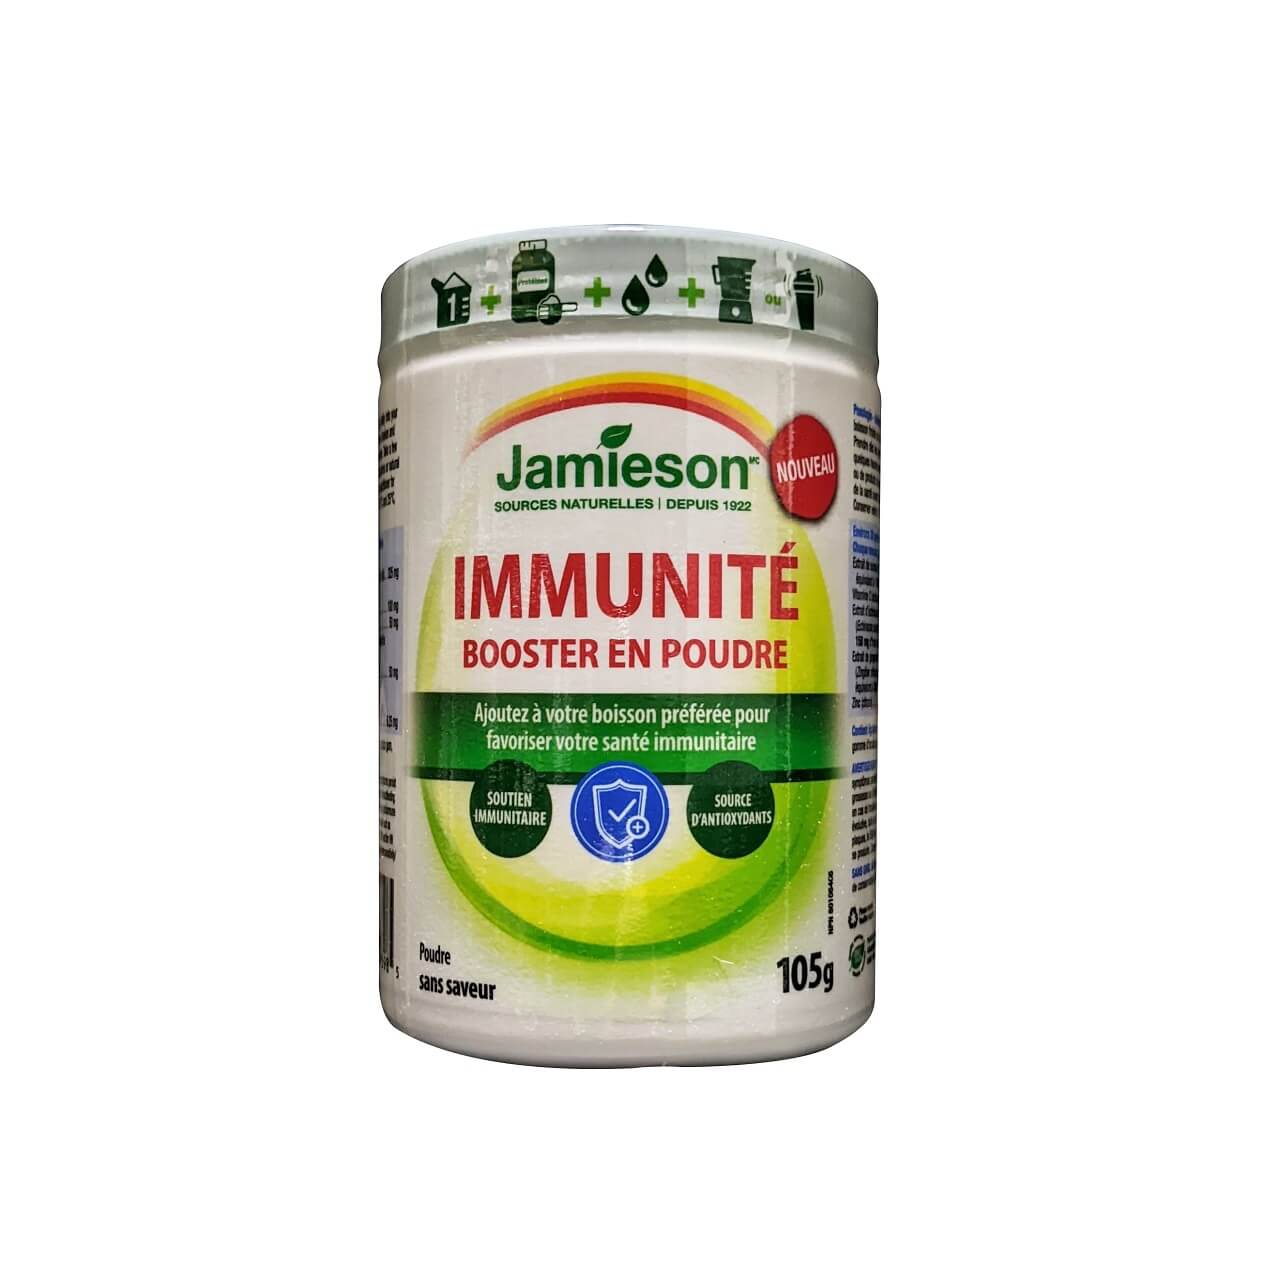 Product label for Jamieson Immune Booster Powder (105 grams) in French